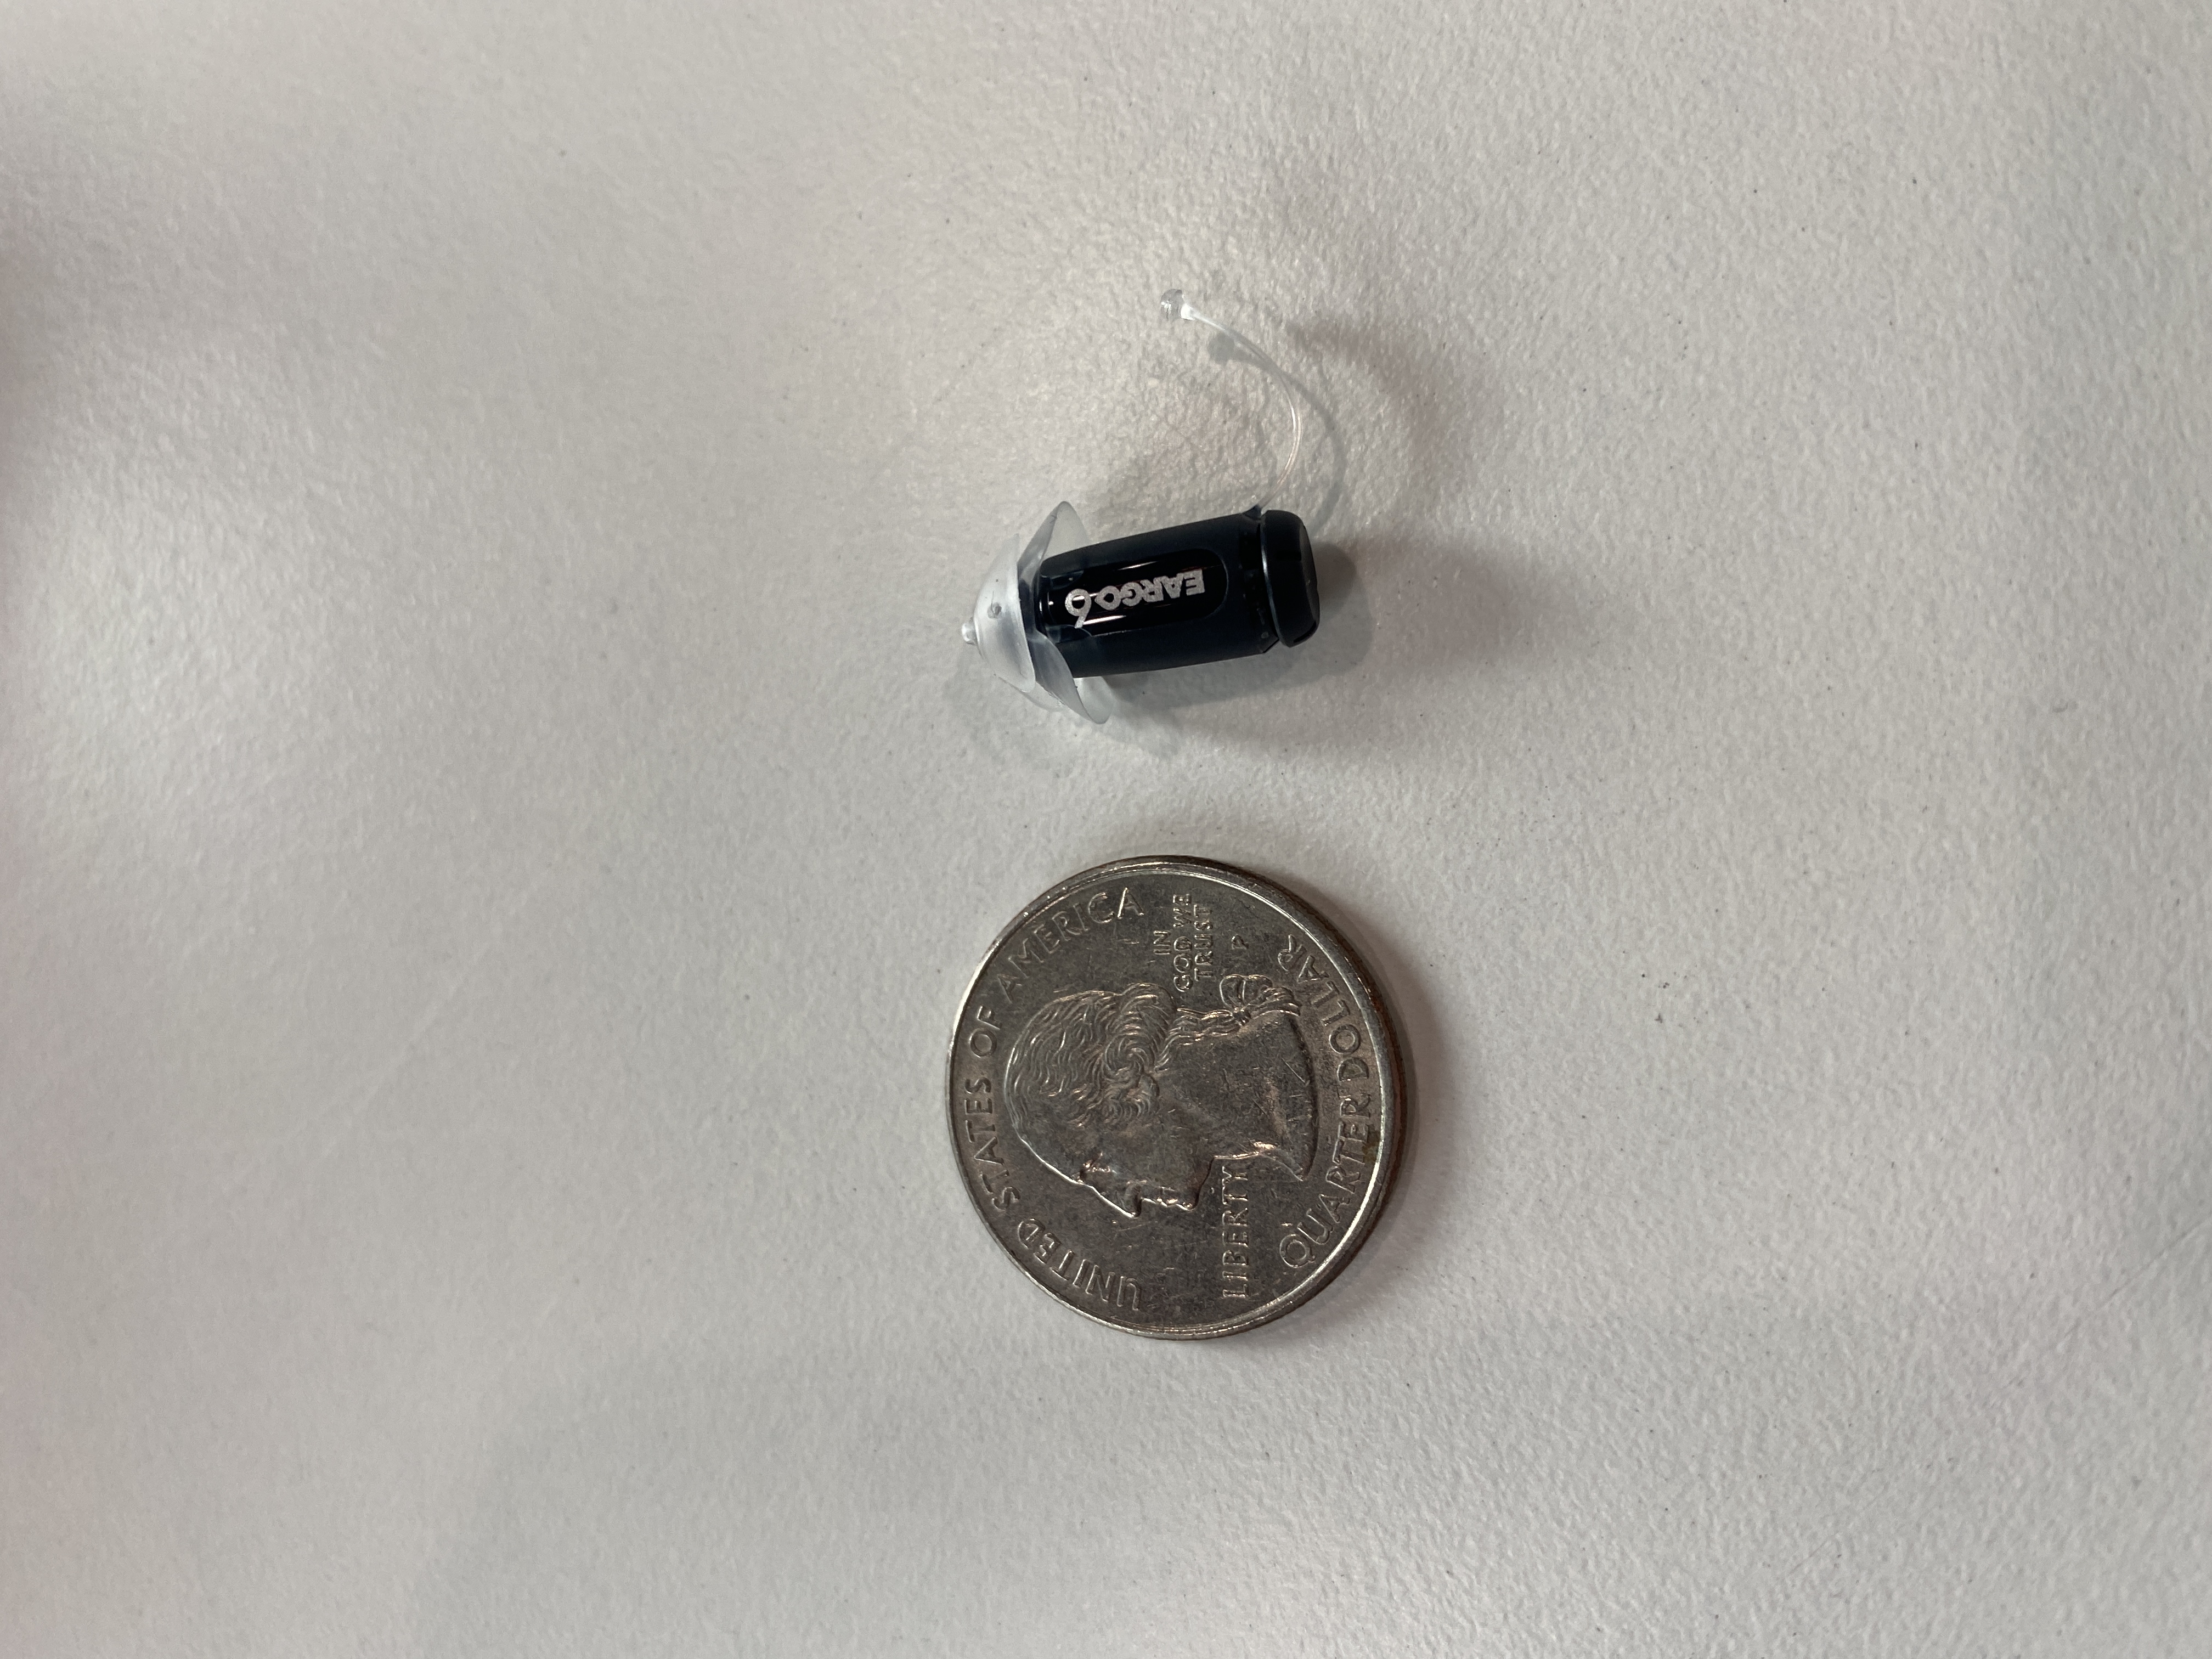 Eargo 6 size compared to a quarter